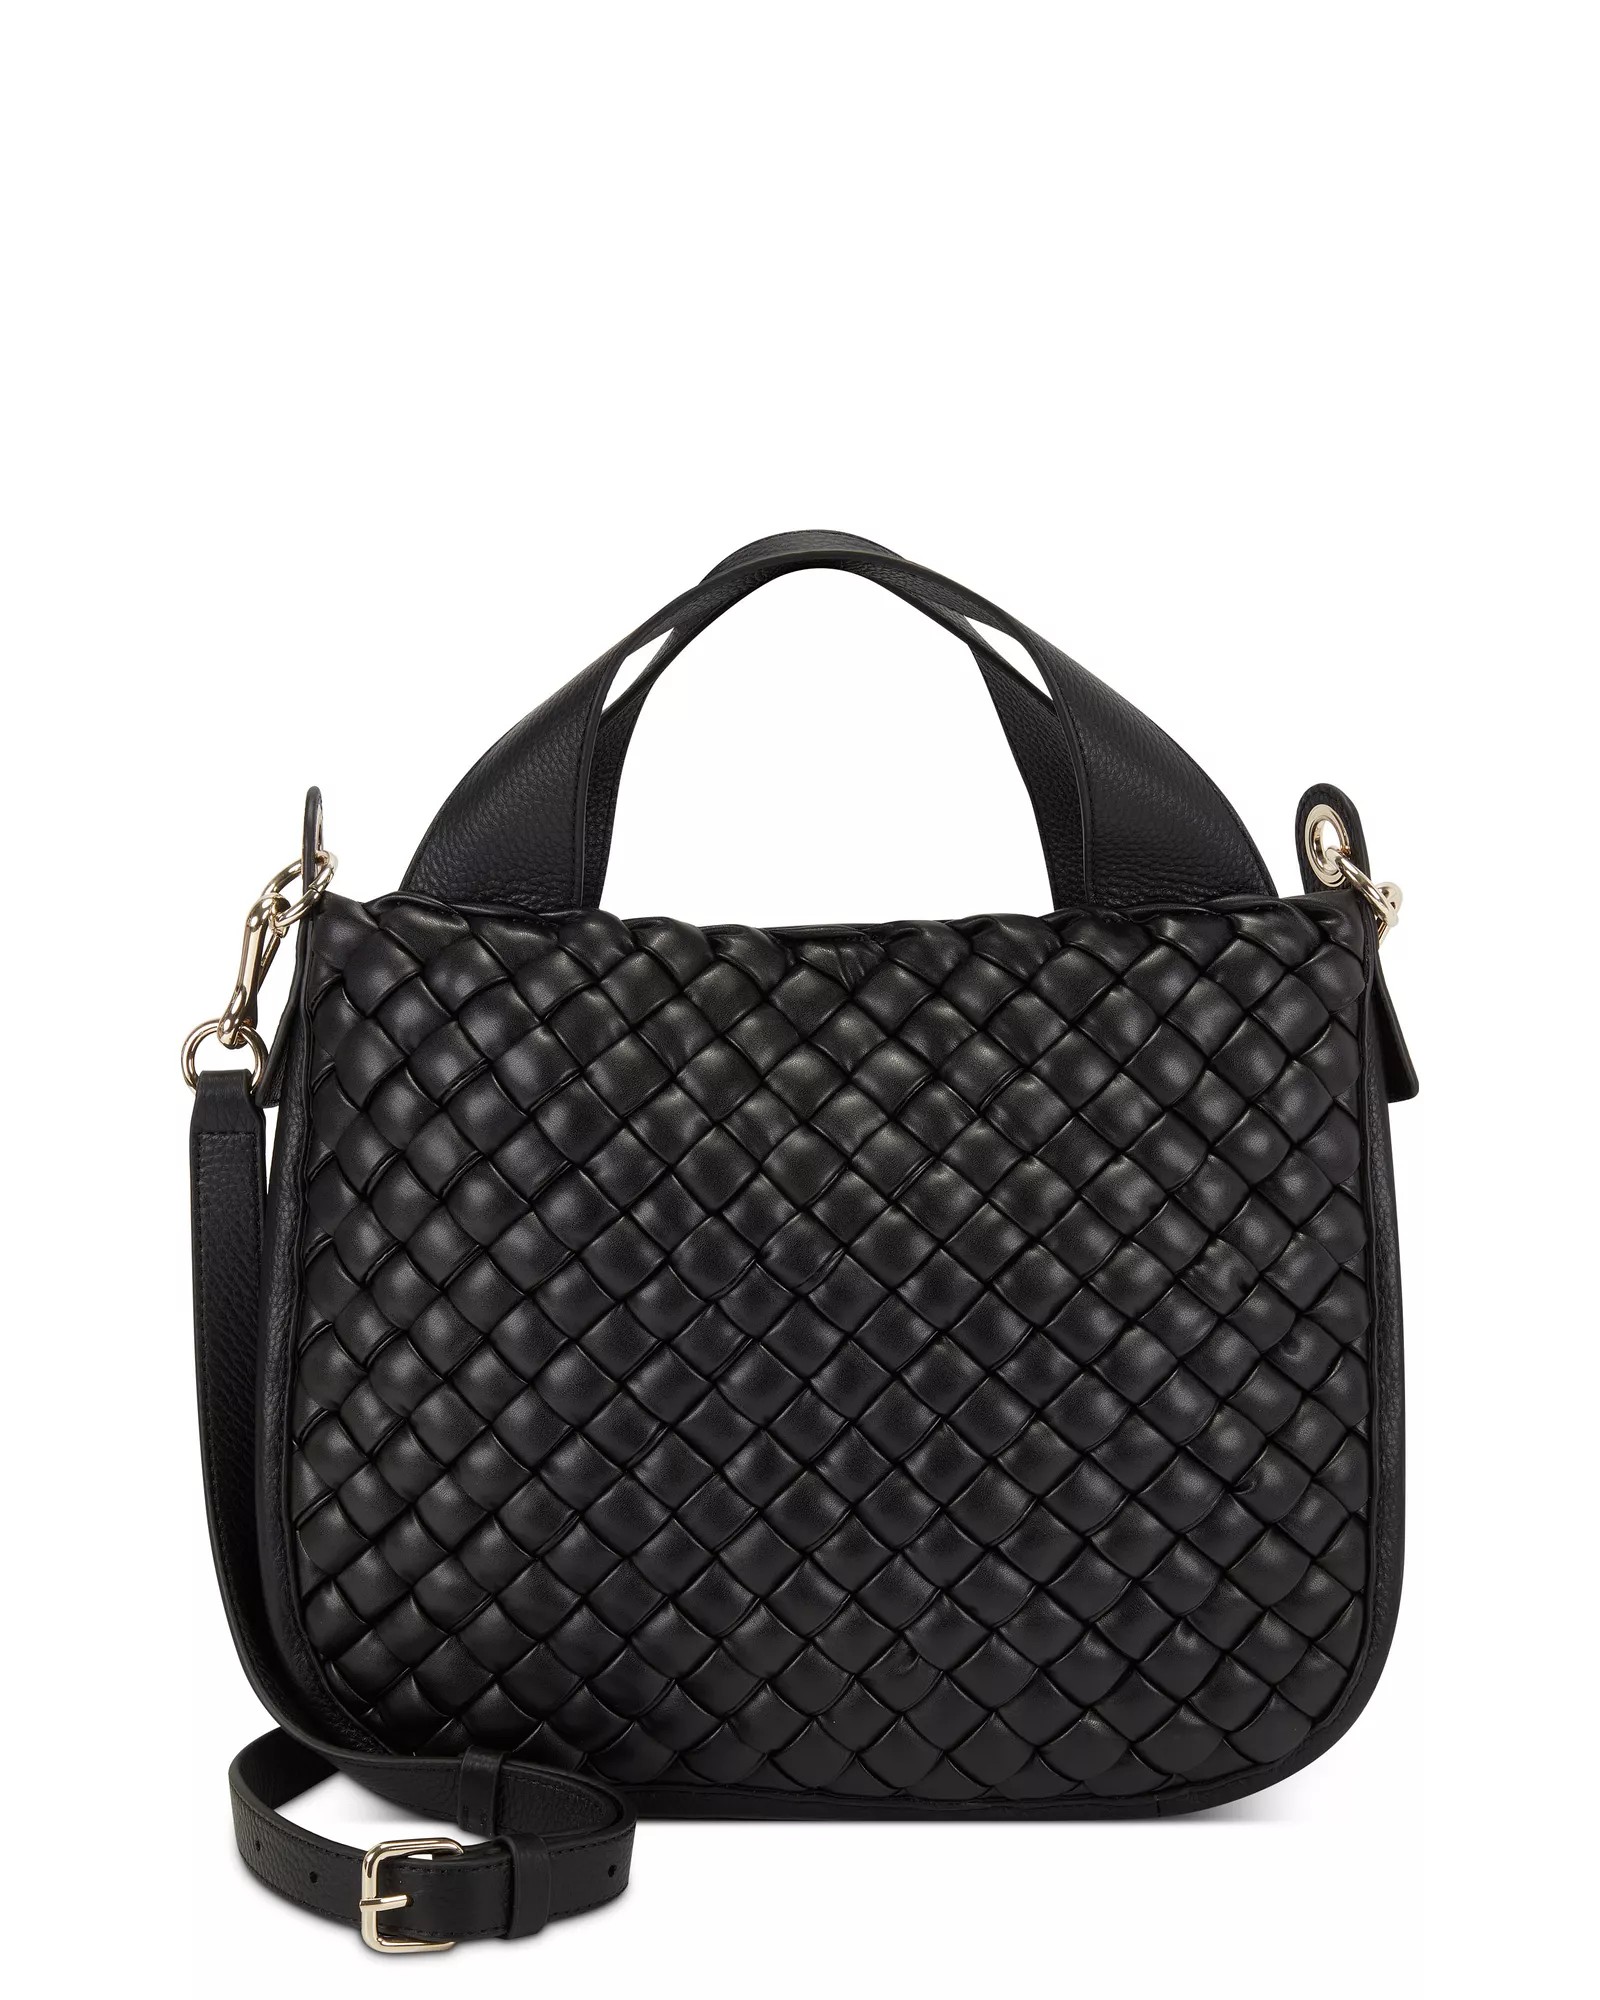 Vince Camuto Convertible Leather Tote - Myri